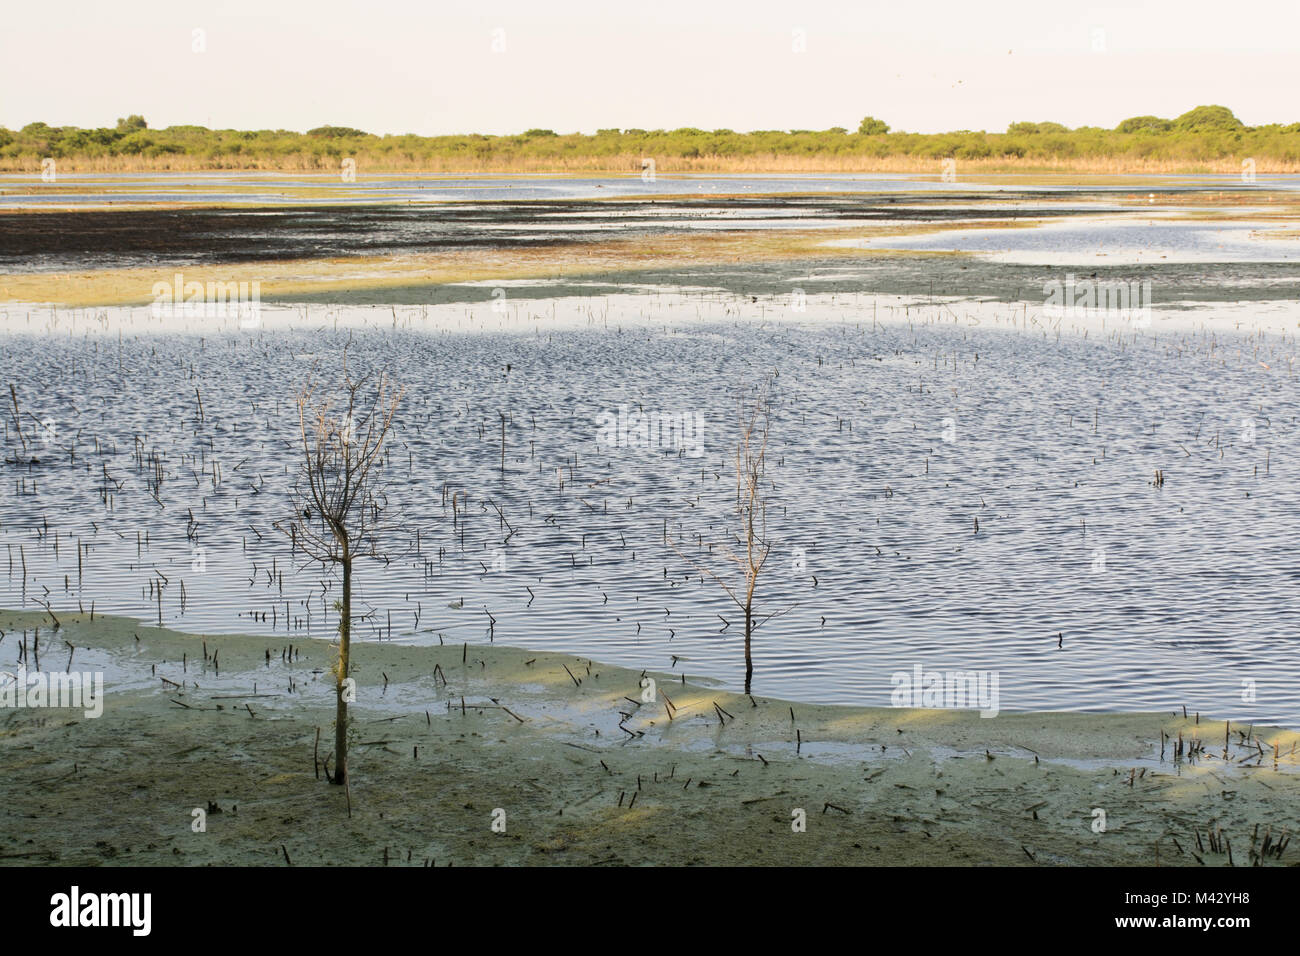 Buenos Aires Costanera Sur Ecological Reserve, Argentina Stock Photo